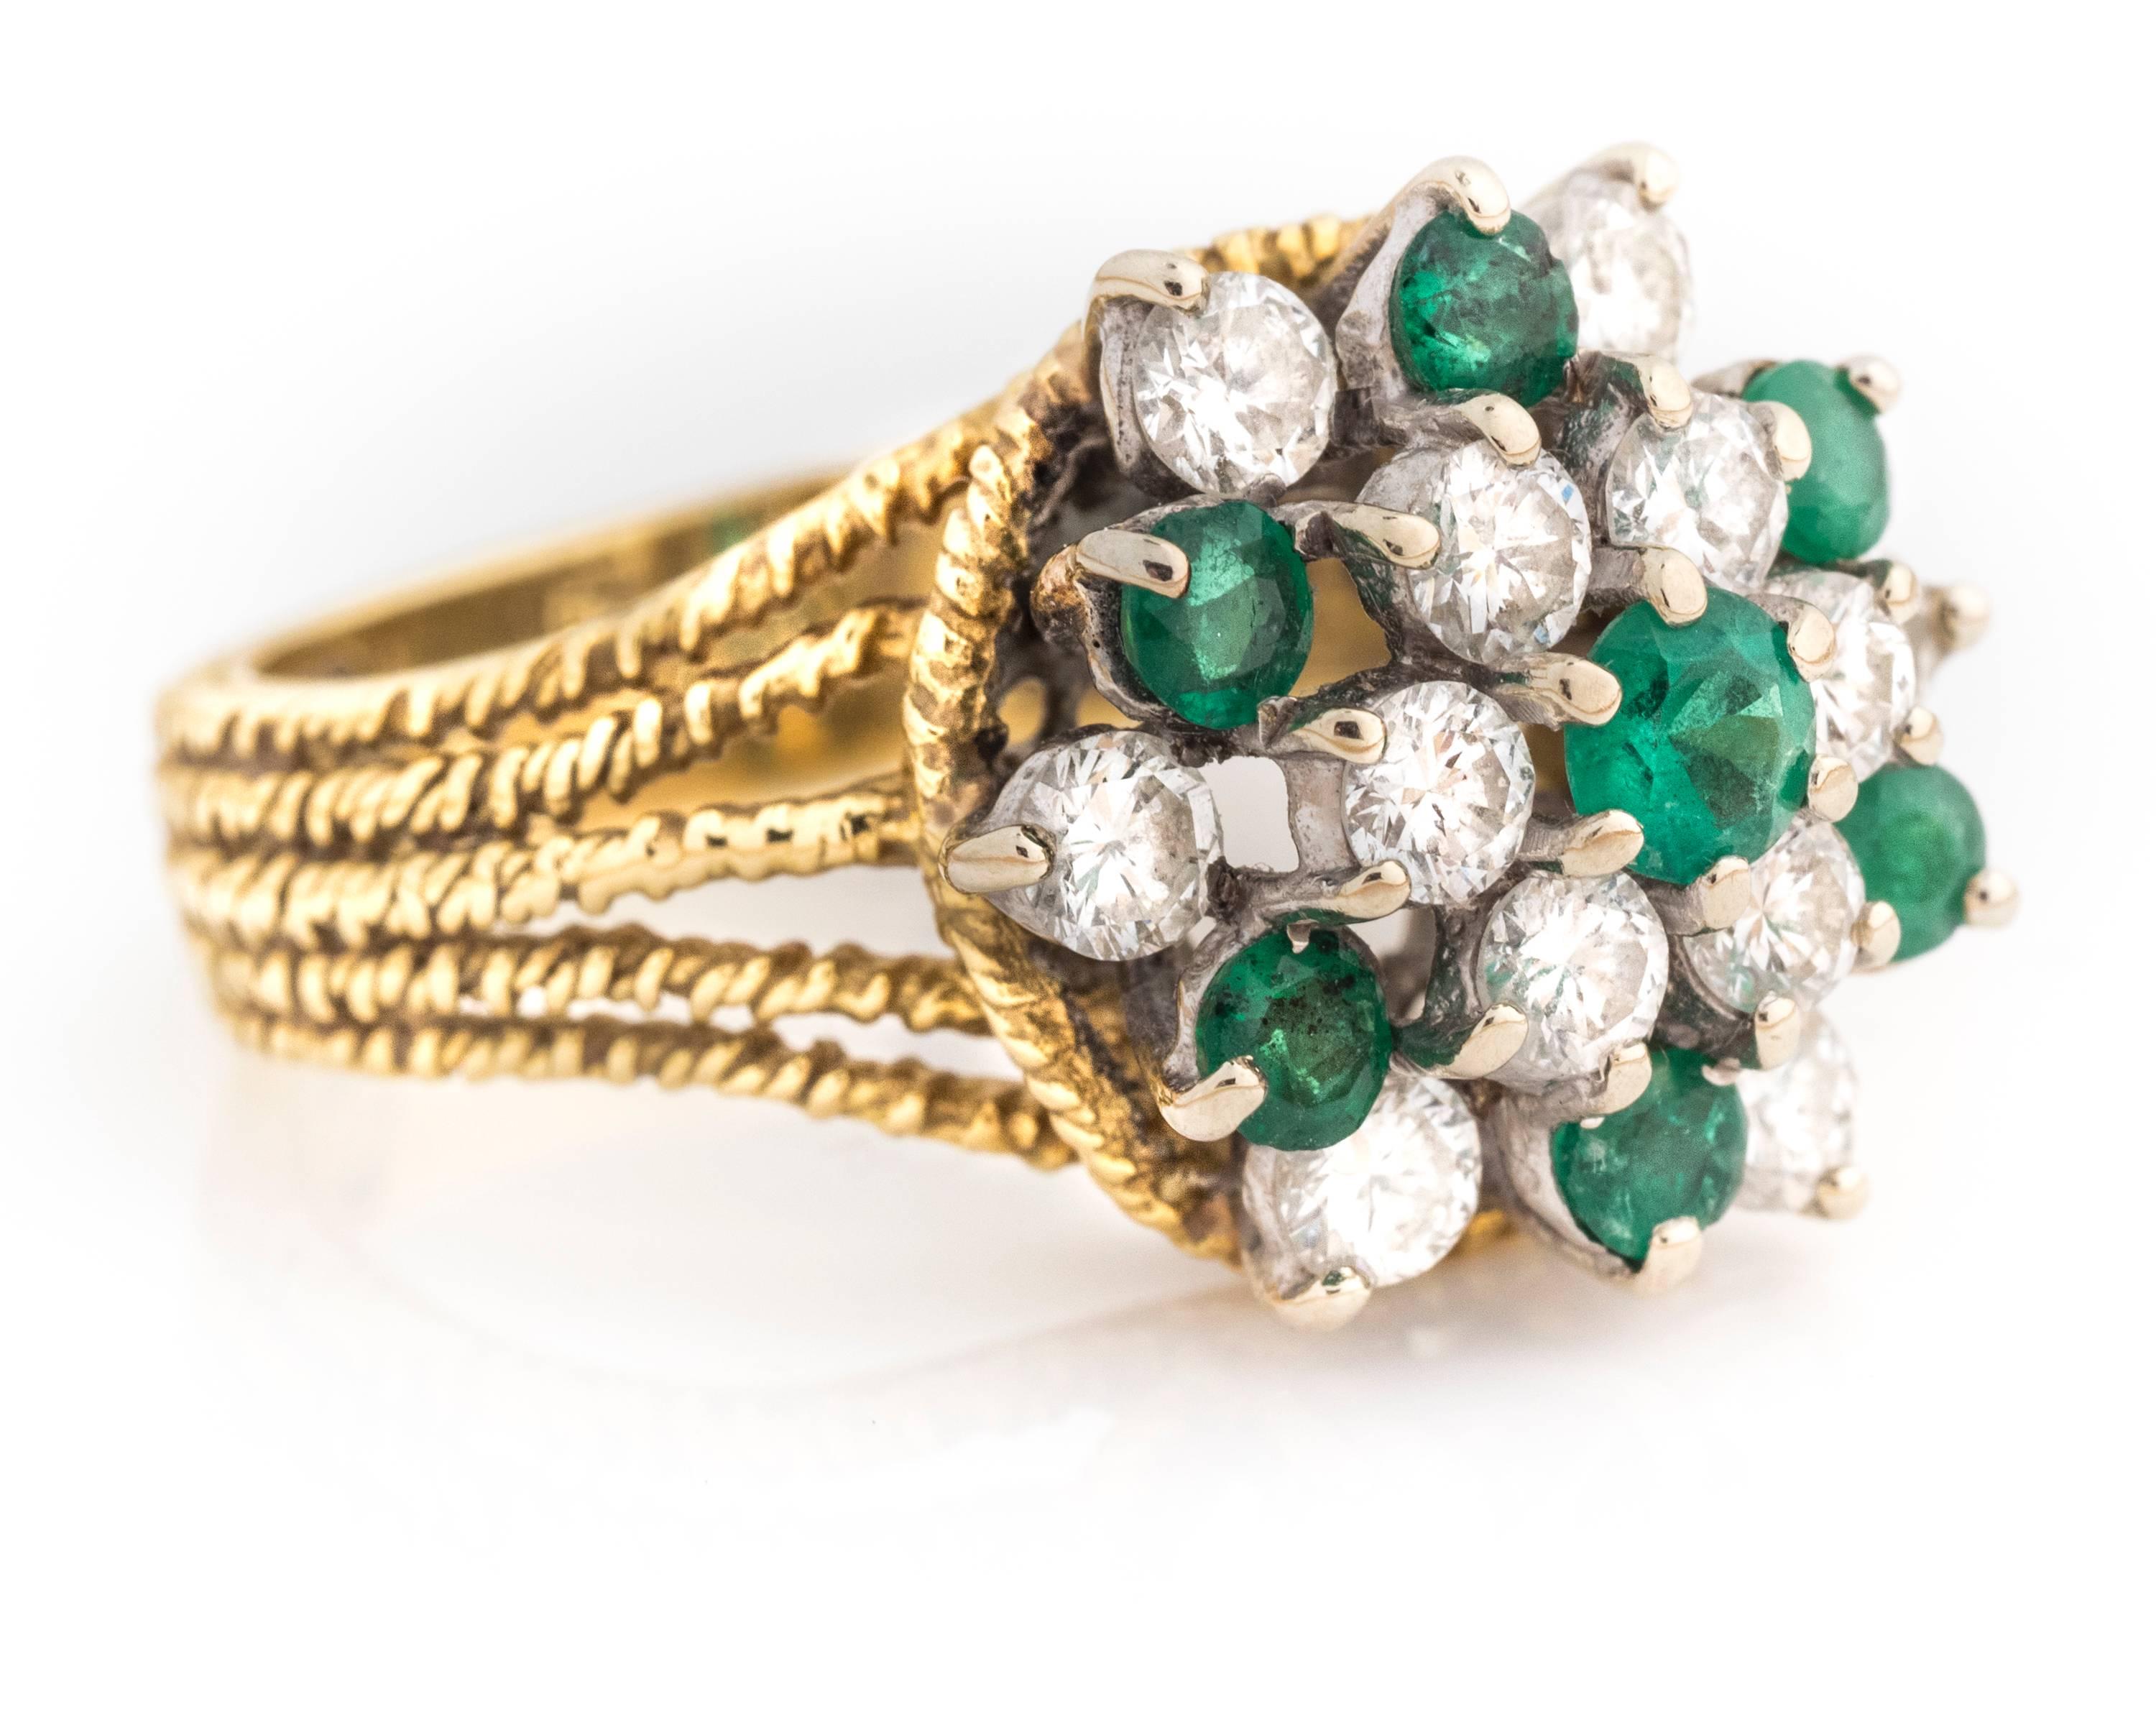 Glowing late 20th century cocktail ring by Hammerman Brothers (signed HB). This ring features a gorgeous bouquet of vivid green Colombian emeralds and round brilliant diamonds on white gold prongs. The prongs further enhance an ornate yellow gold